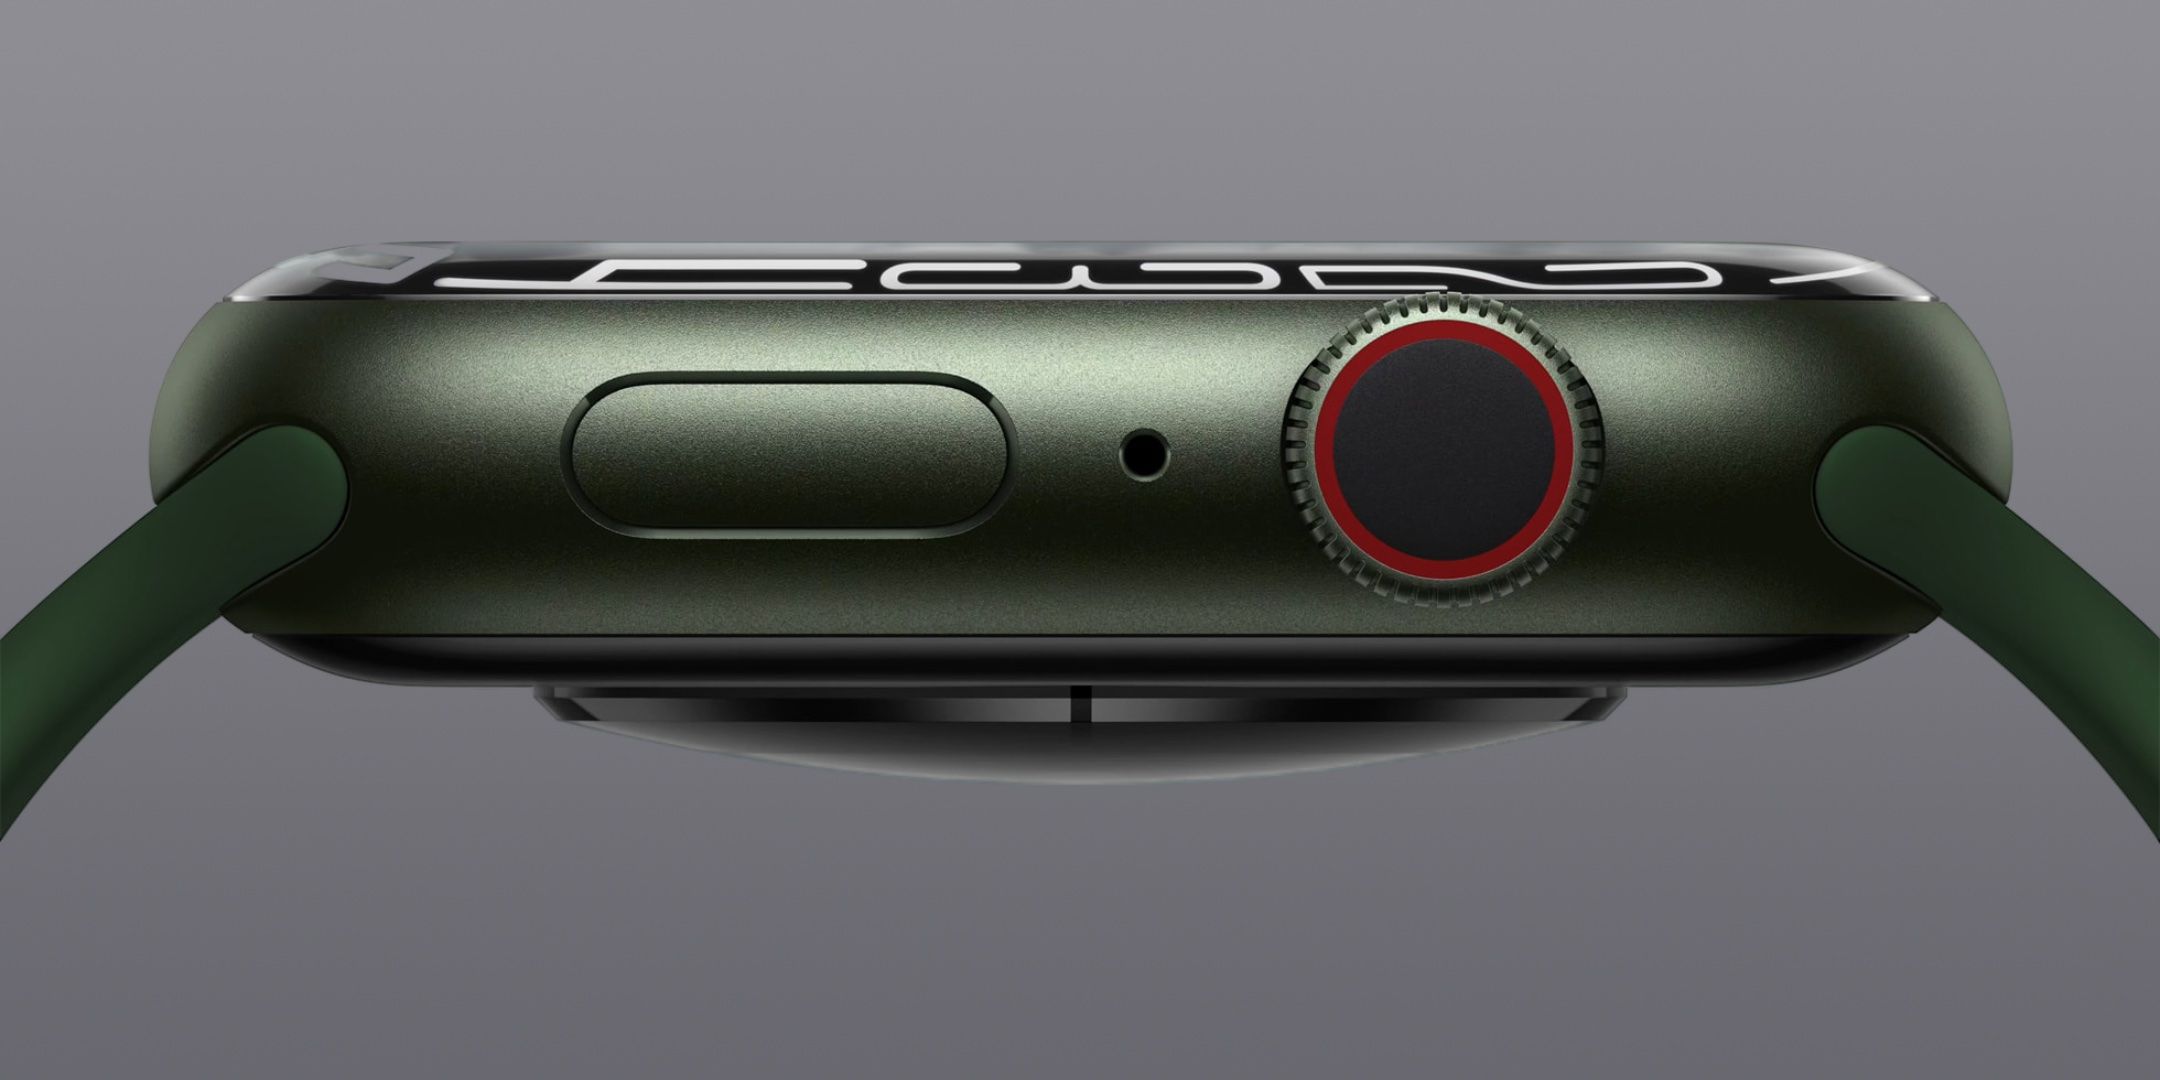 Redesigned Apple Watch Series 7, promo image.